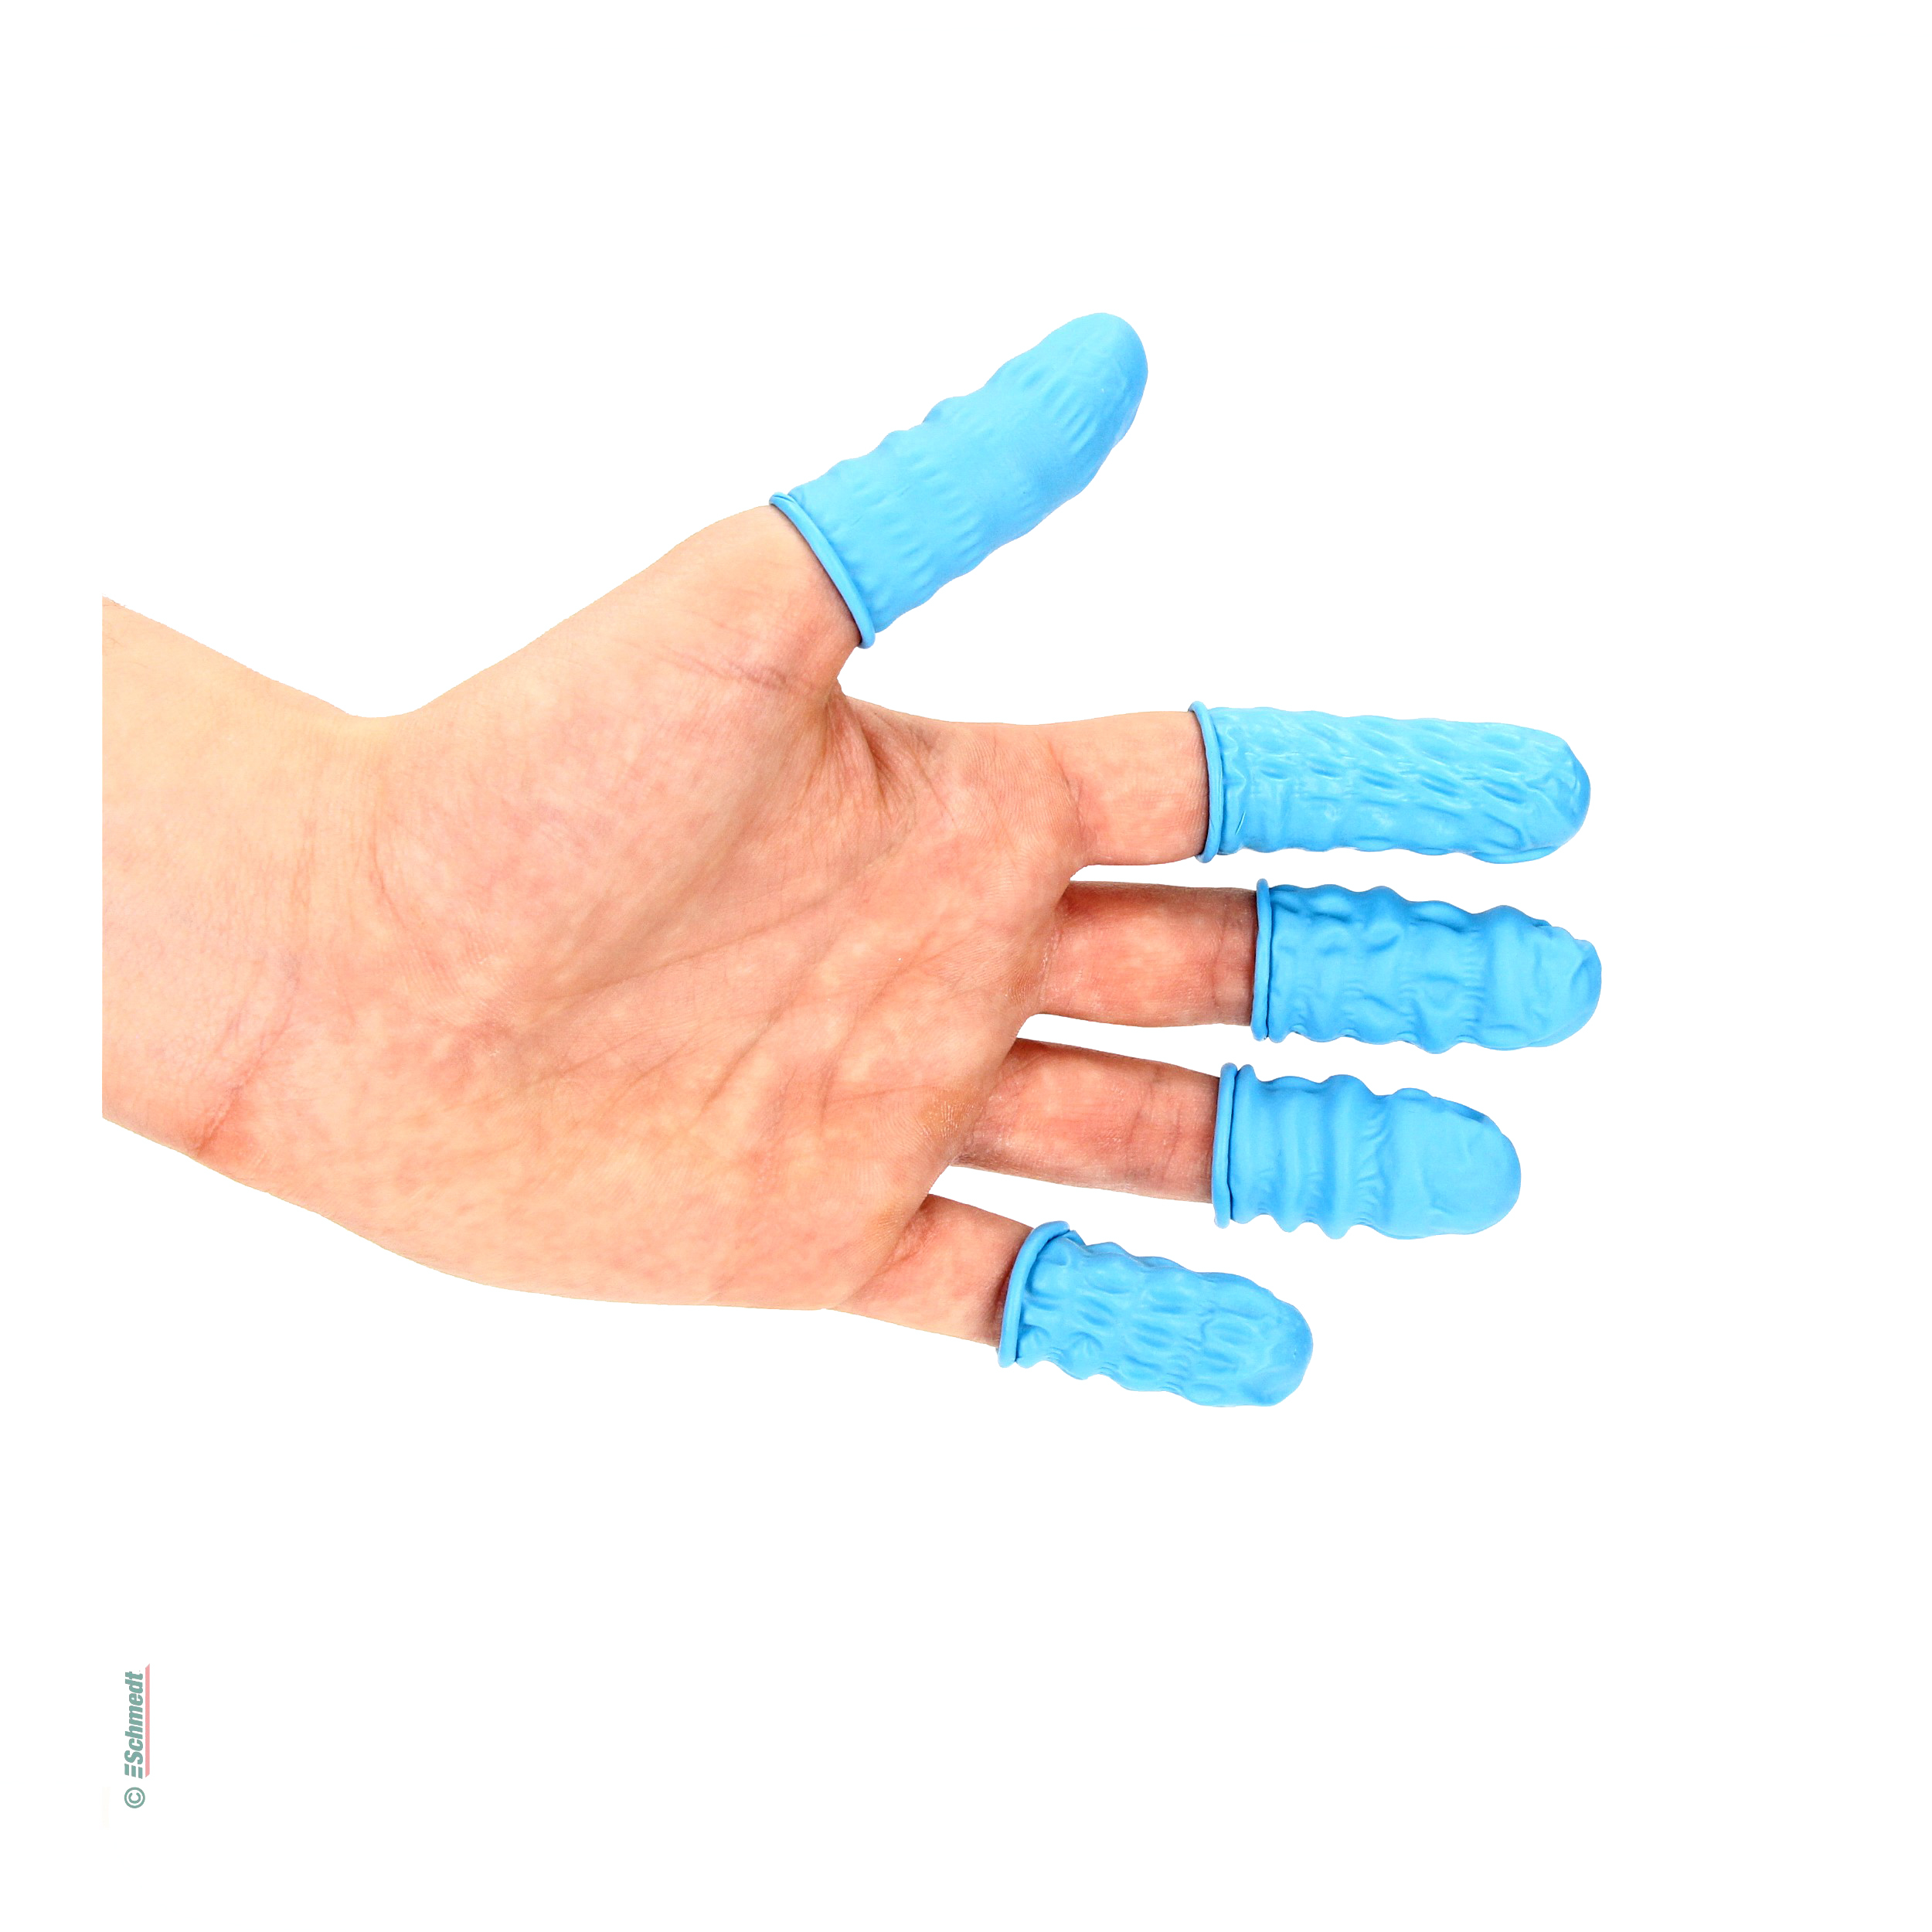 Finger cots - nitrile - Packet of 100 pieces - to prevent contamination or for protection. Hands stay dry and skin can breathe... - image-1